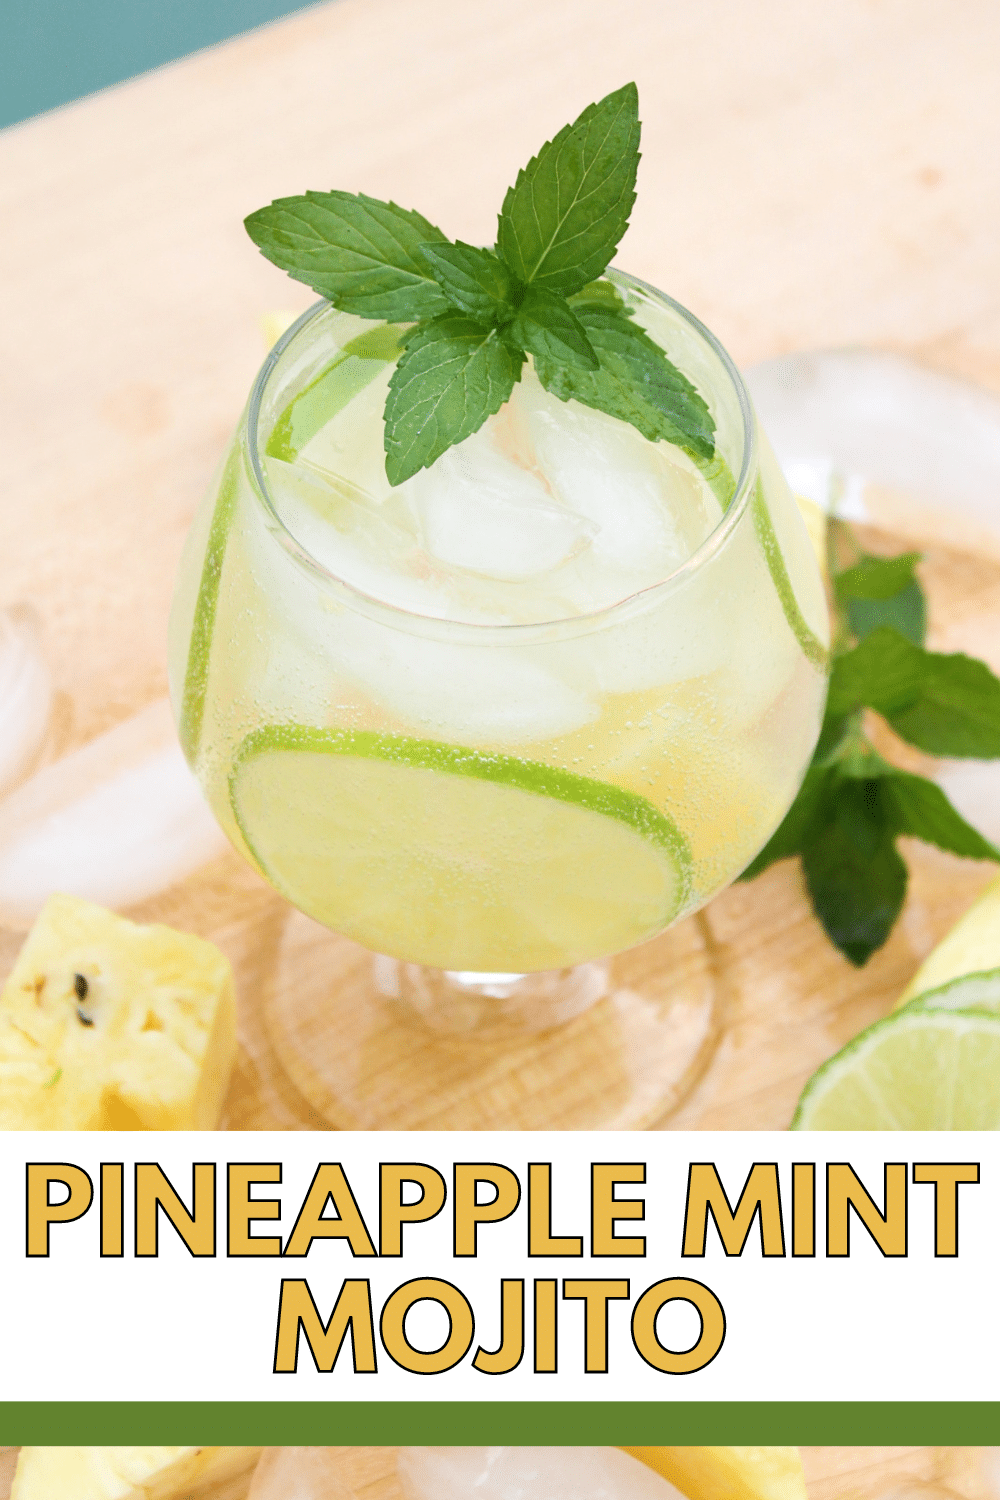 Pineapple Mint Mojito is a must-try beverage with a burst of tropical flavors filled with sweetness, tanginess, and a minty hint of rum. #pineapplemintmojito #pineapplemojitorecipe #pineapple #mojito #summerbeverage via @wondermomwannab